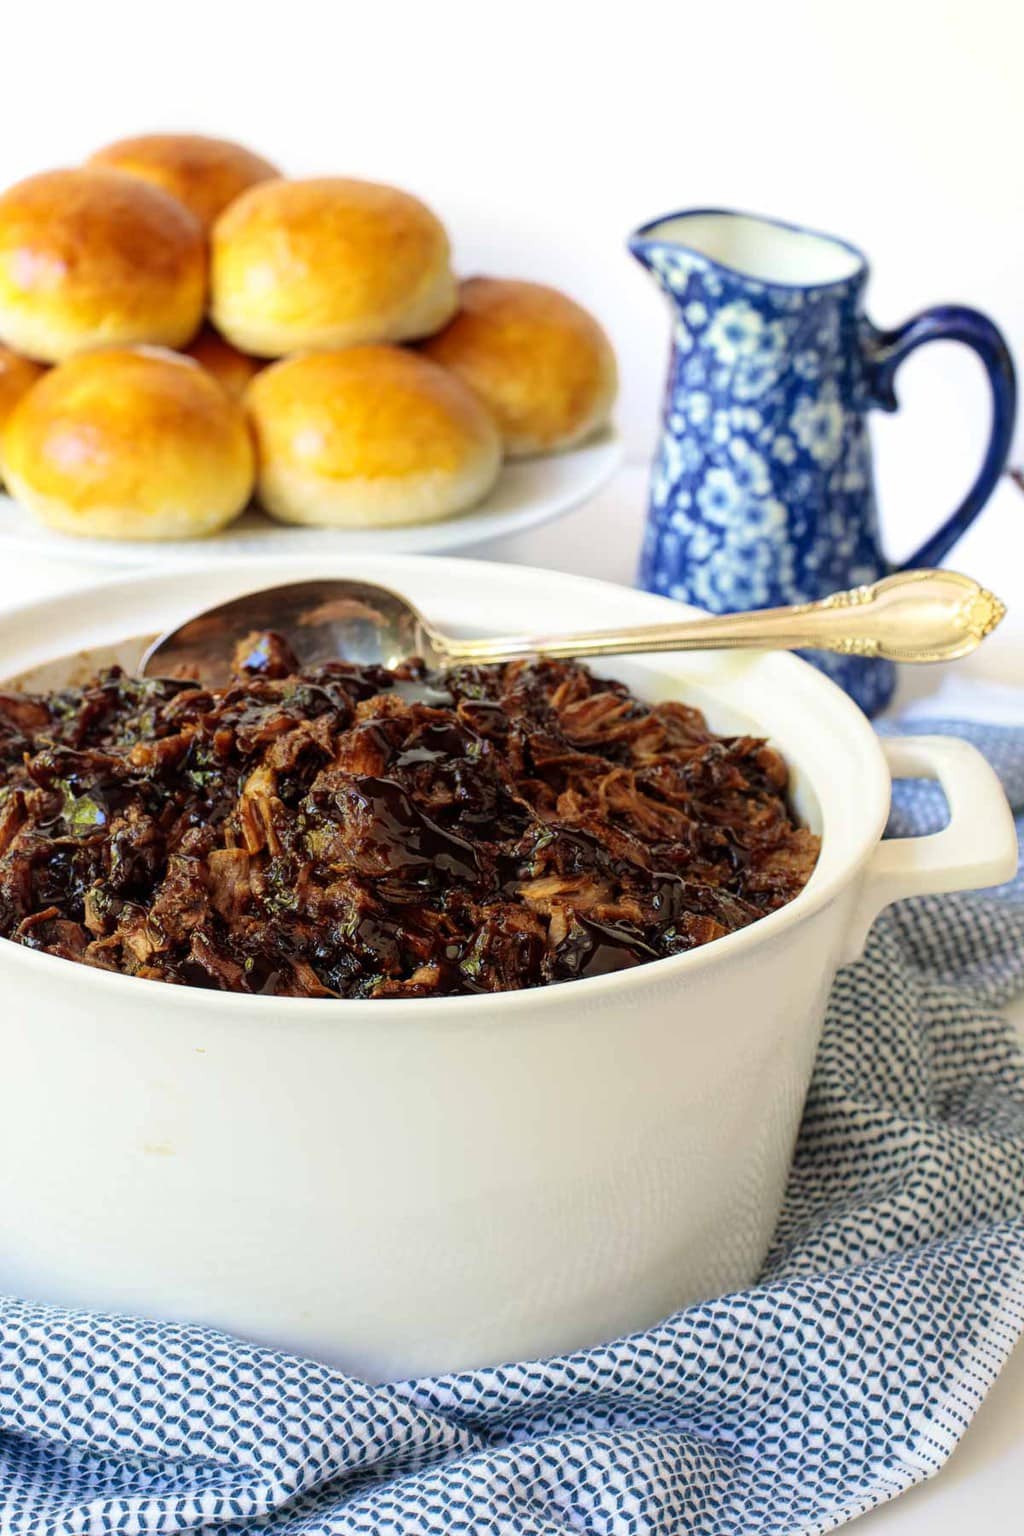 Photo of a white serving dish filled with Brown Sugar Balsamic Pulled Pork. The dish is on a blue and white patterned serving cloth and homemade brioche buns are on a plate in the background.